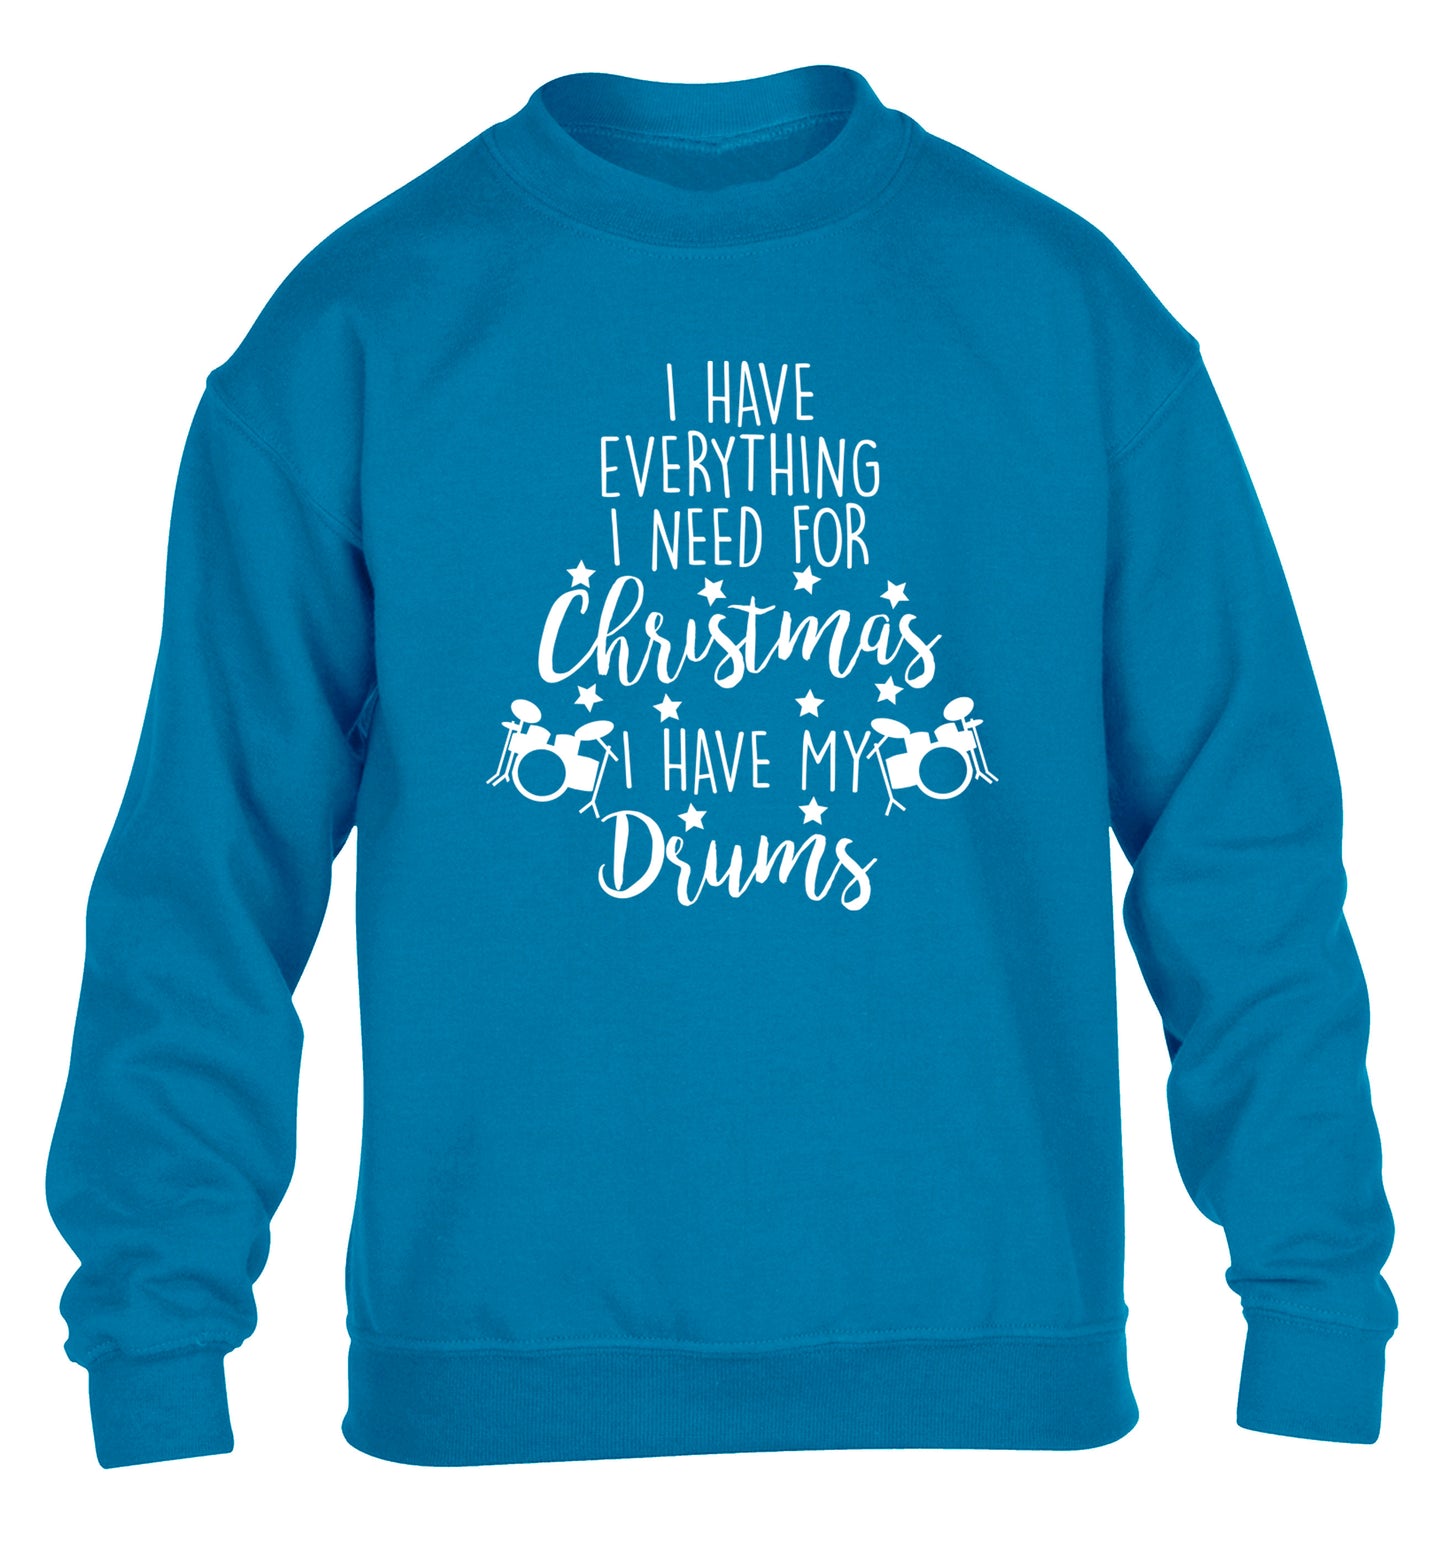 I have everything I need for Christmas I have my drums! children's blue sweater 12-14 Years